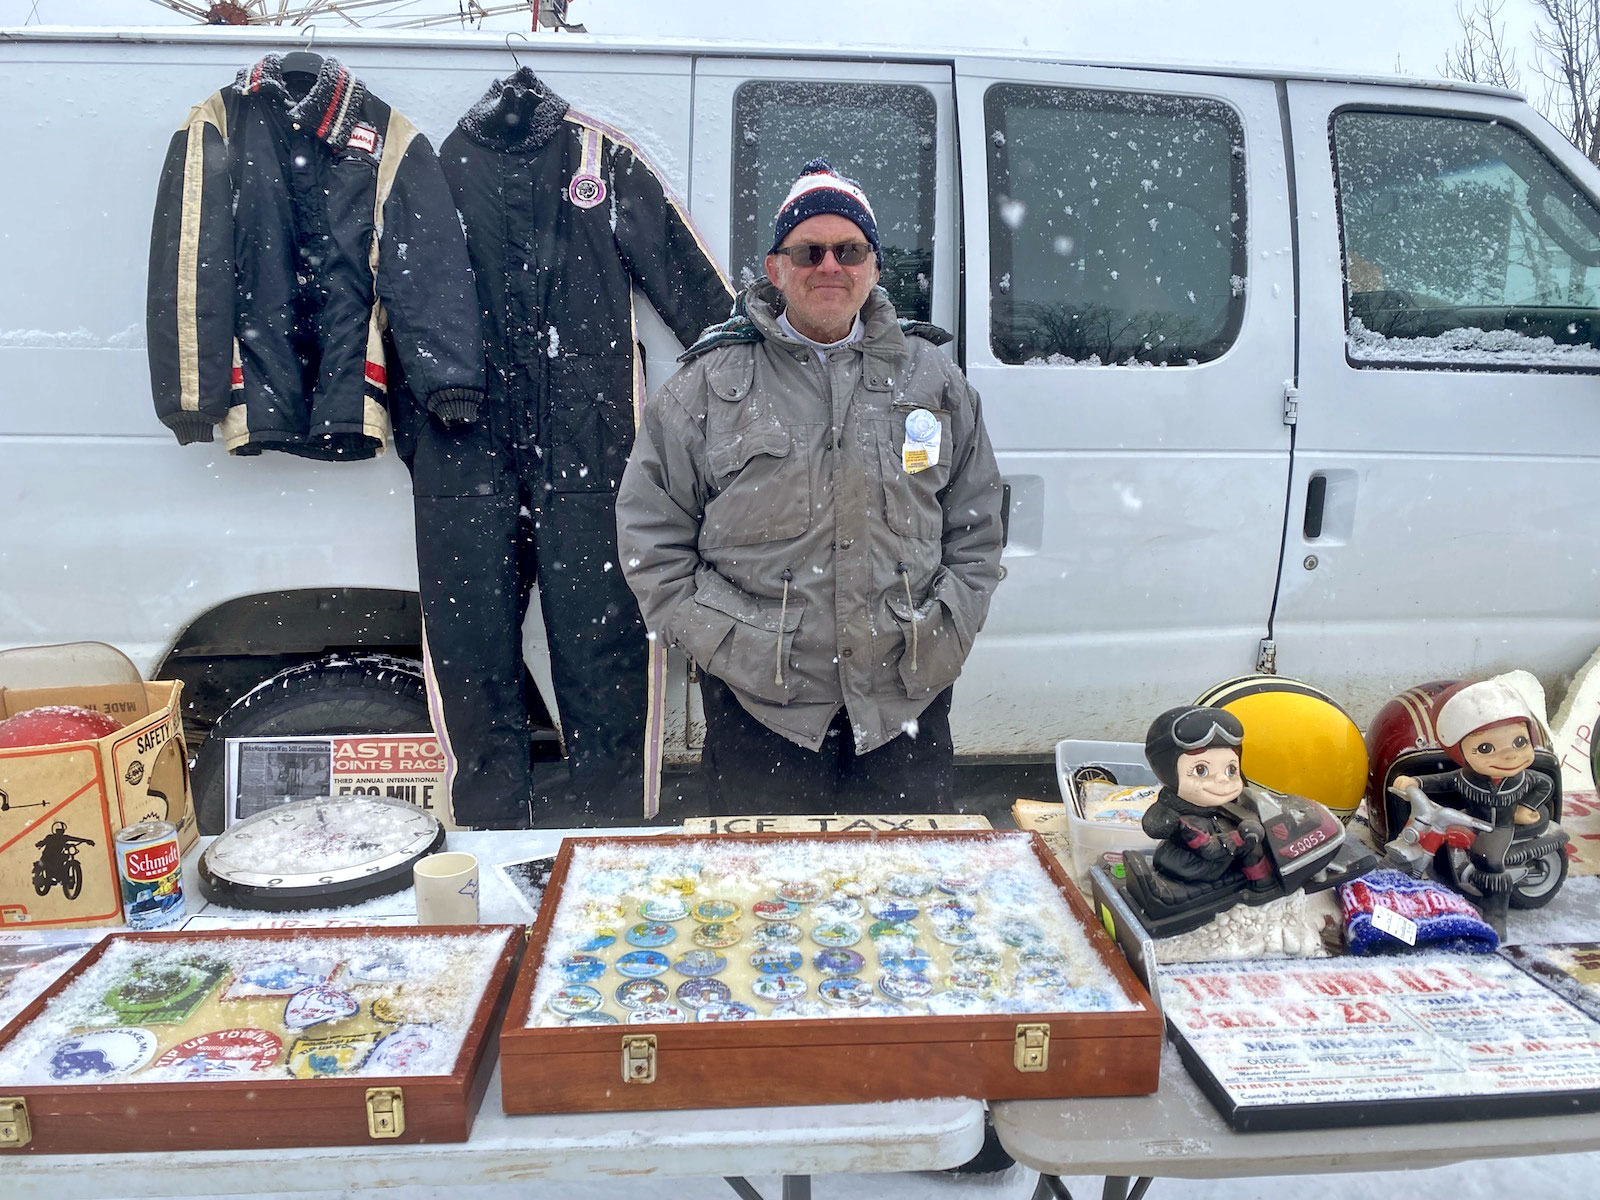 a man in a light gray-brown parka stands in front of a table laden with old buttons and plates and dolls. Behind him, a white van is parked with jackets hanging from the side.